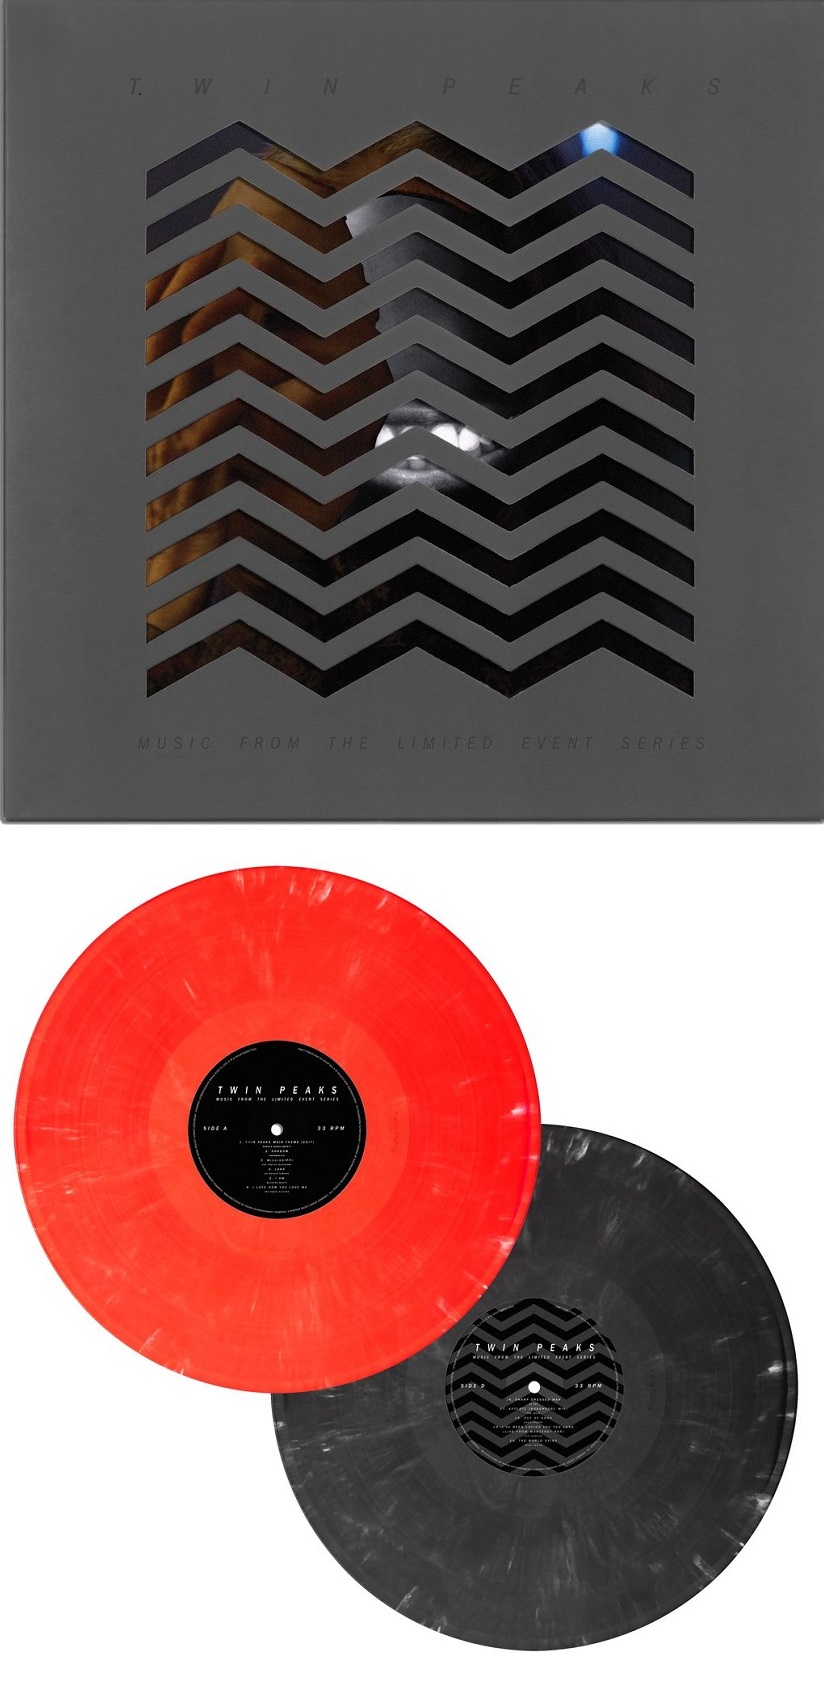 Twin Peaks: Music From The Limited Event Series